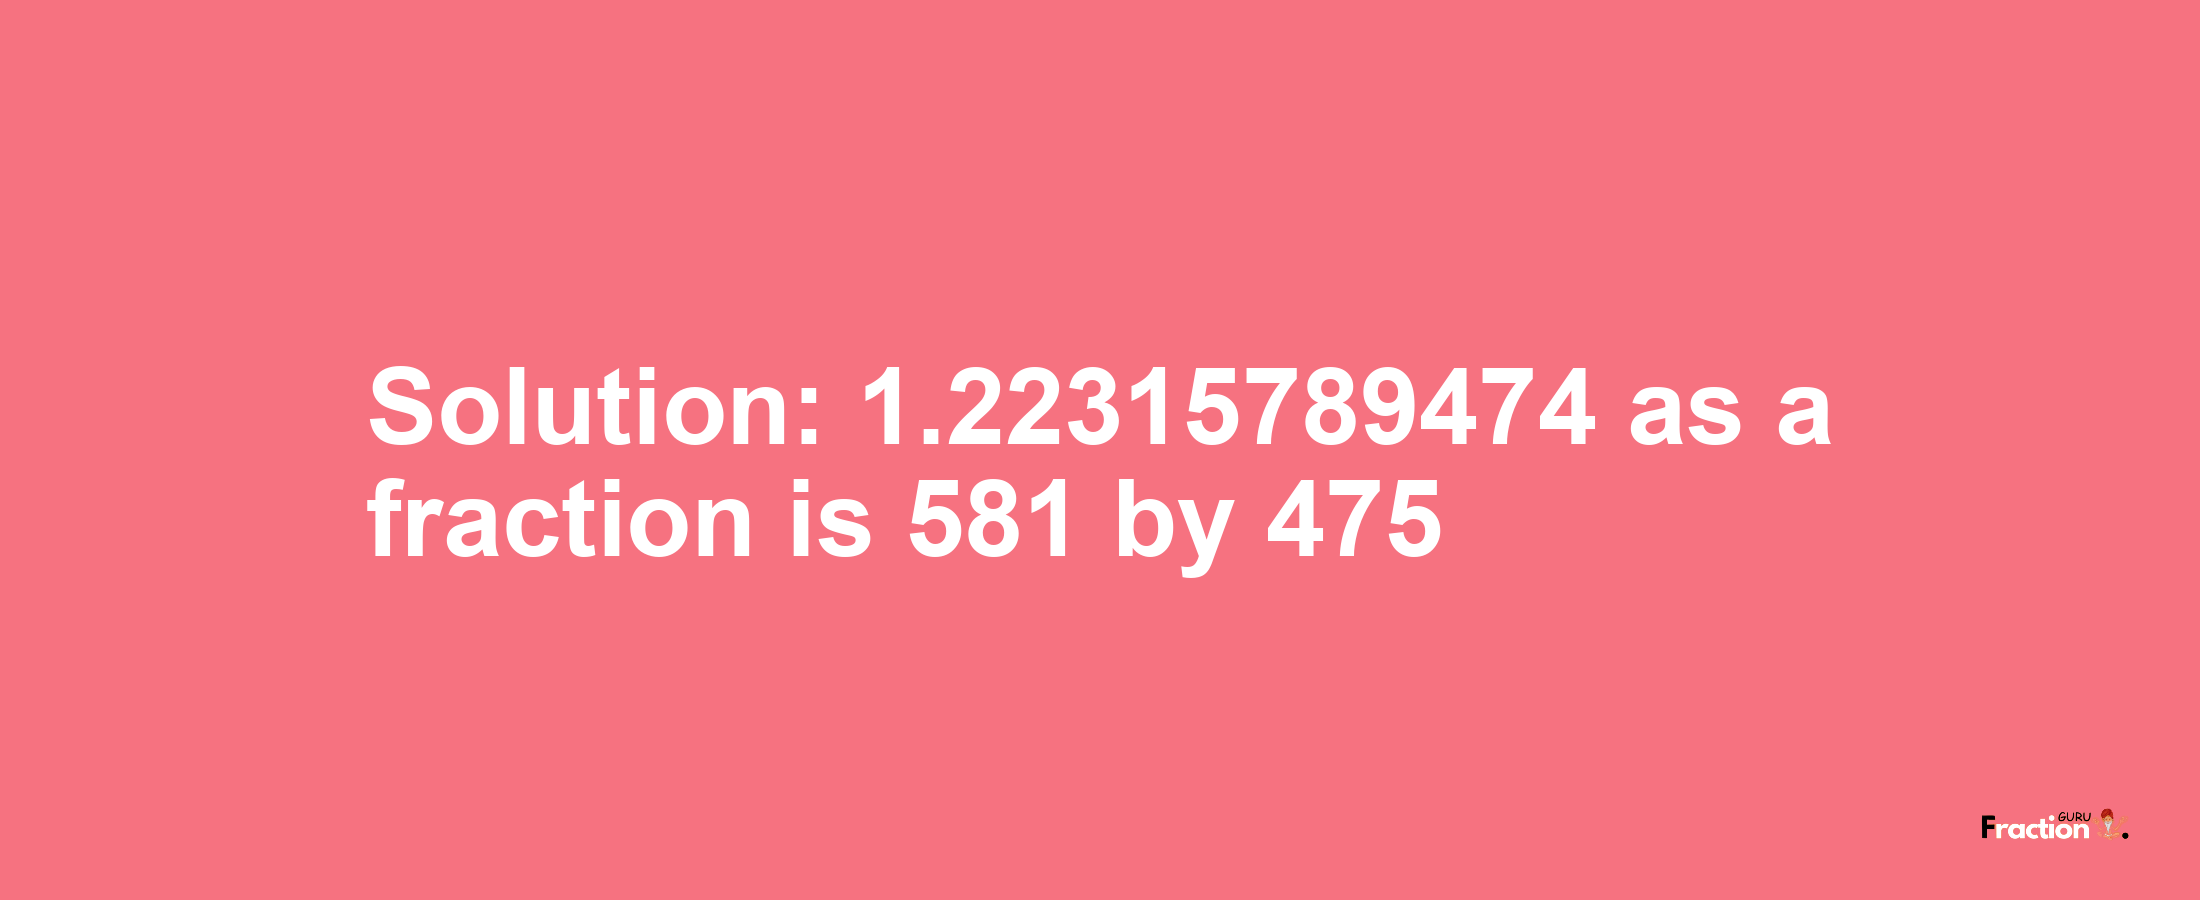 Solution:1.22315789474 as a fraction is 581/475